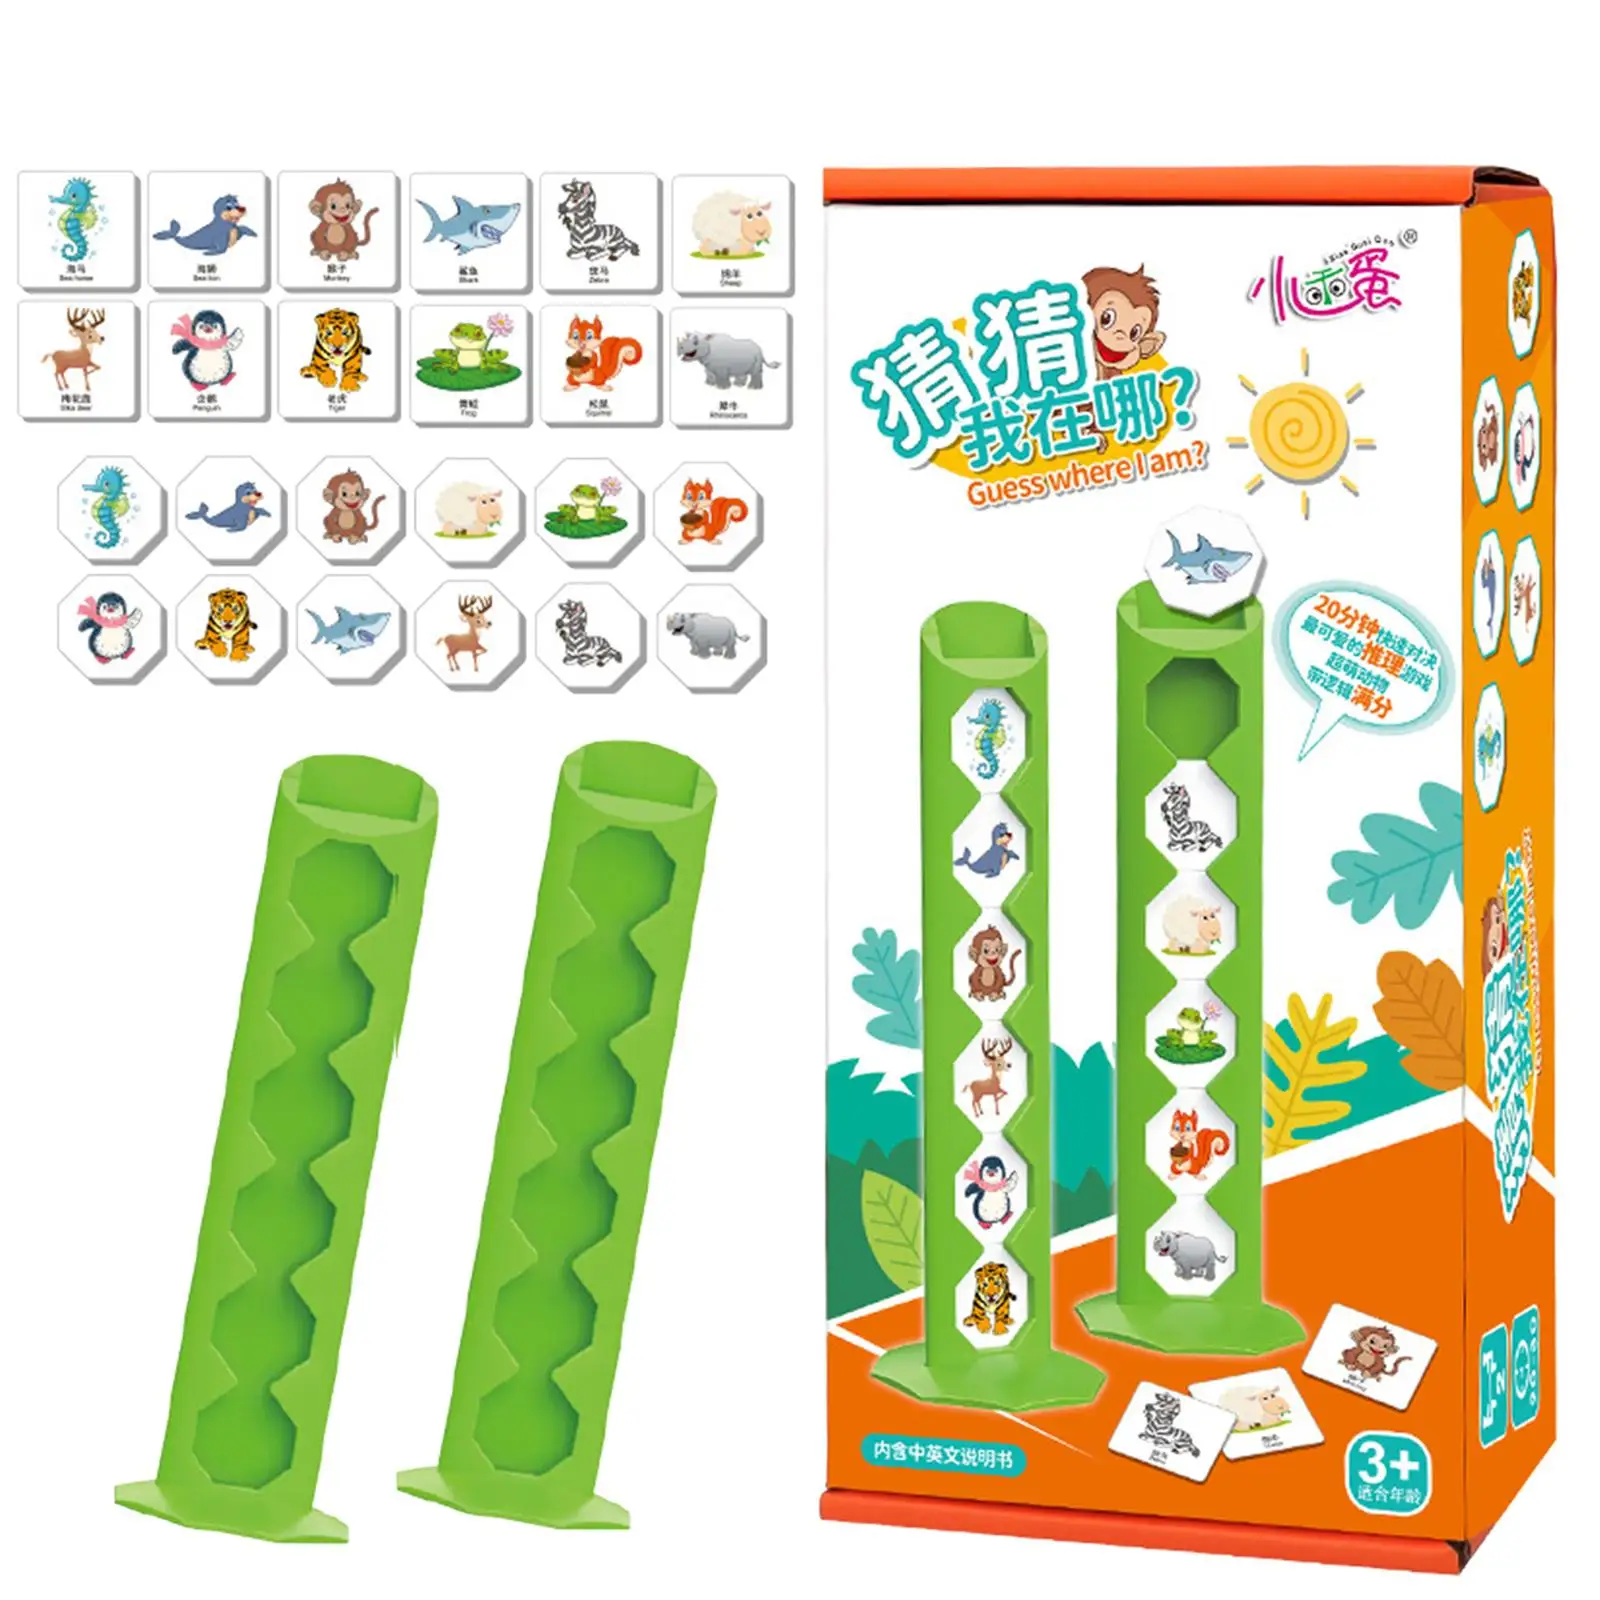 Guessing Game for Kids Novelty Reasoning Game for Party Prop Children Gifts